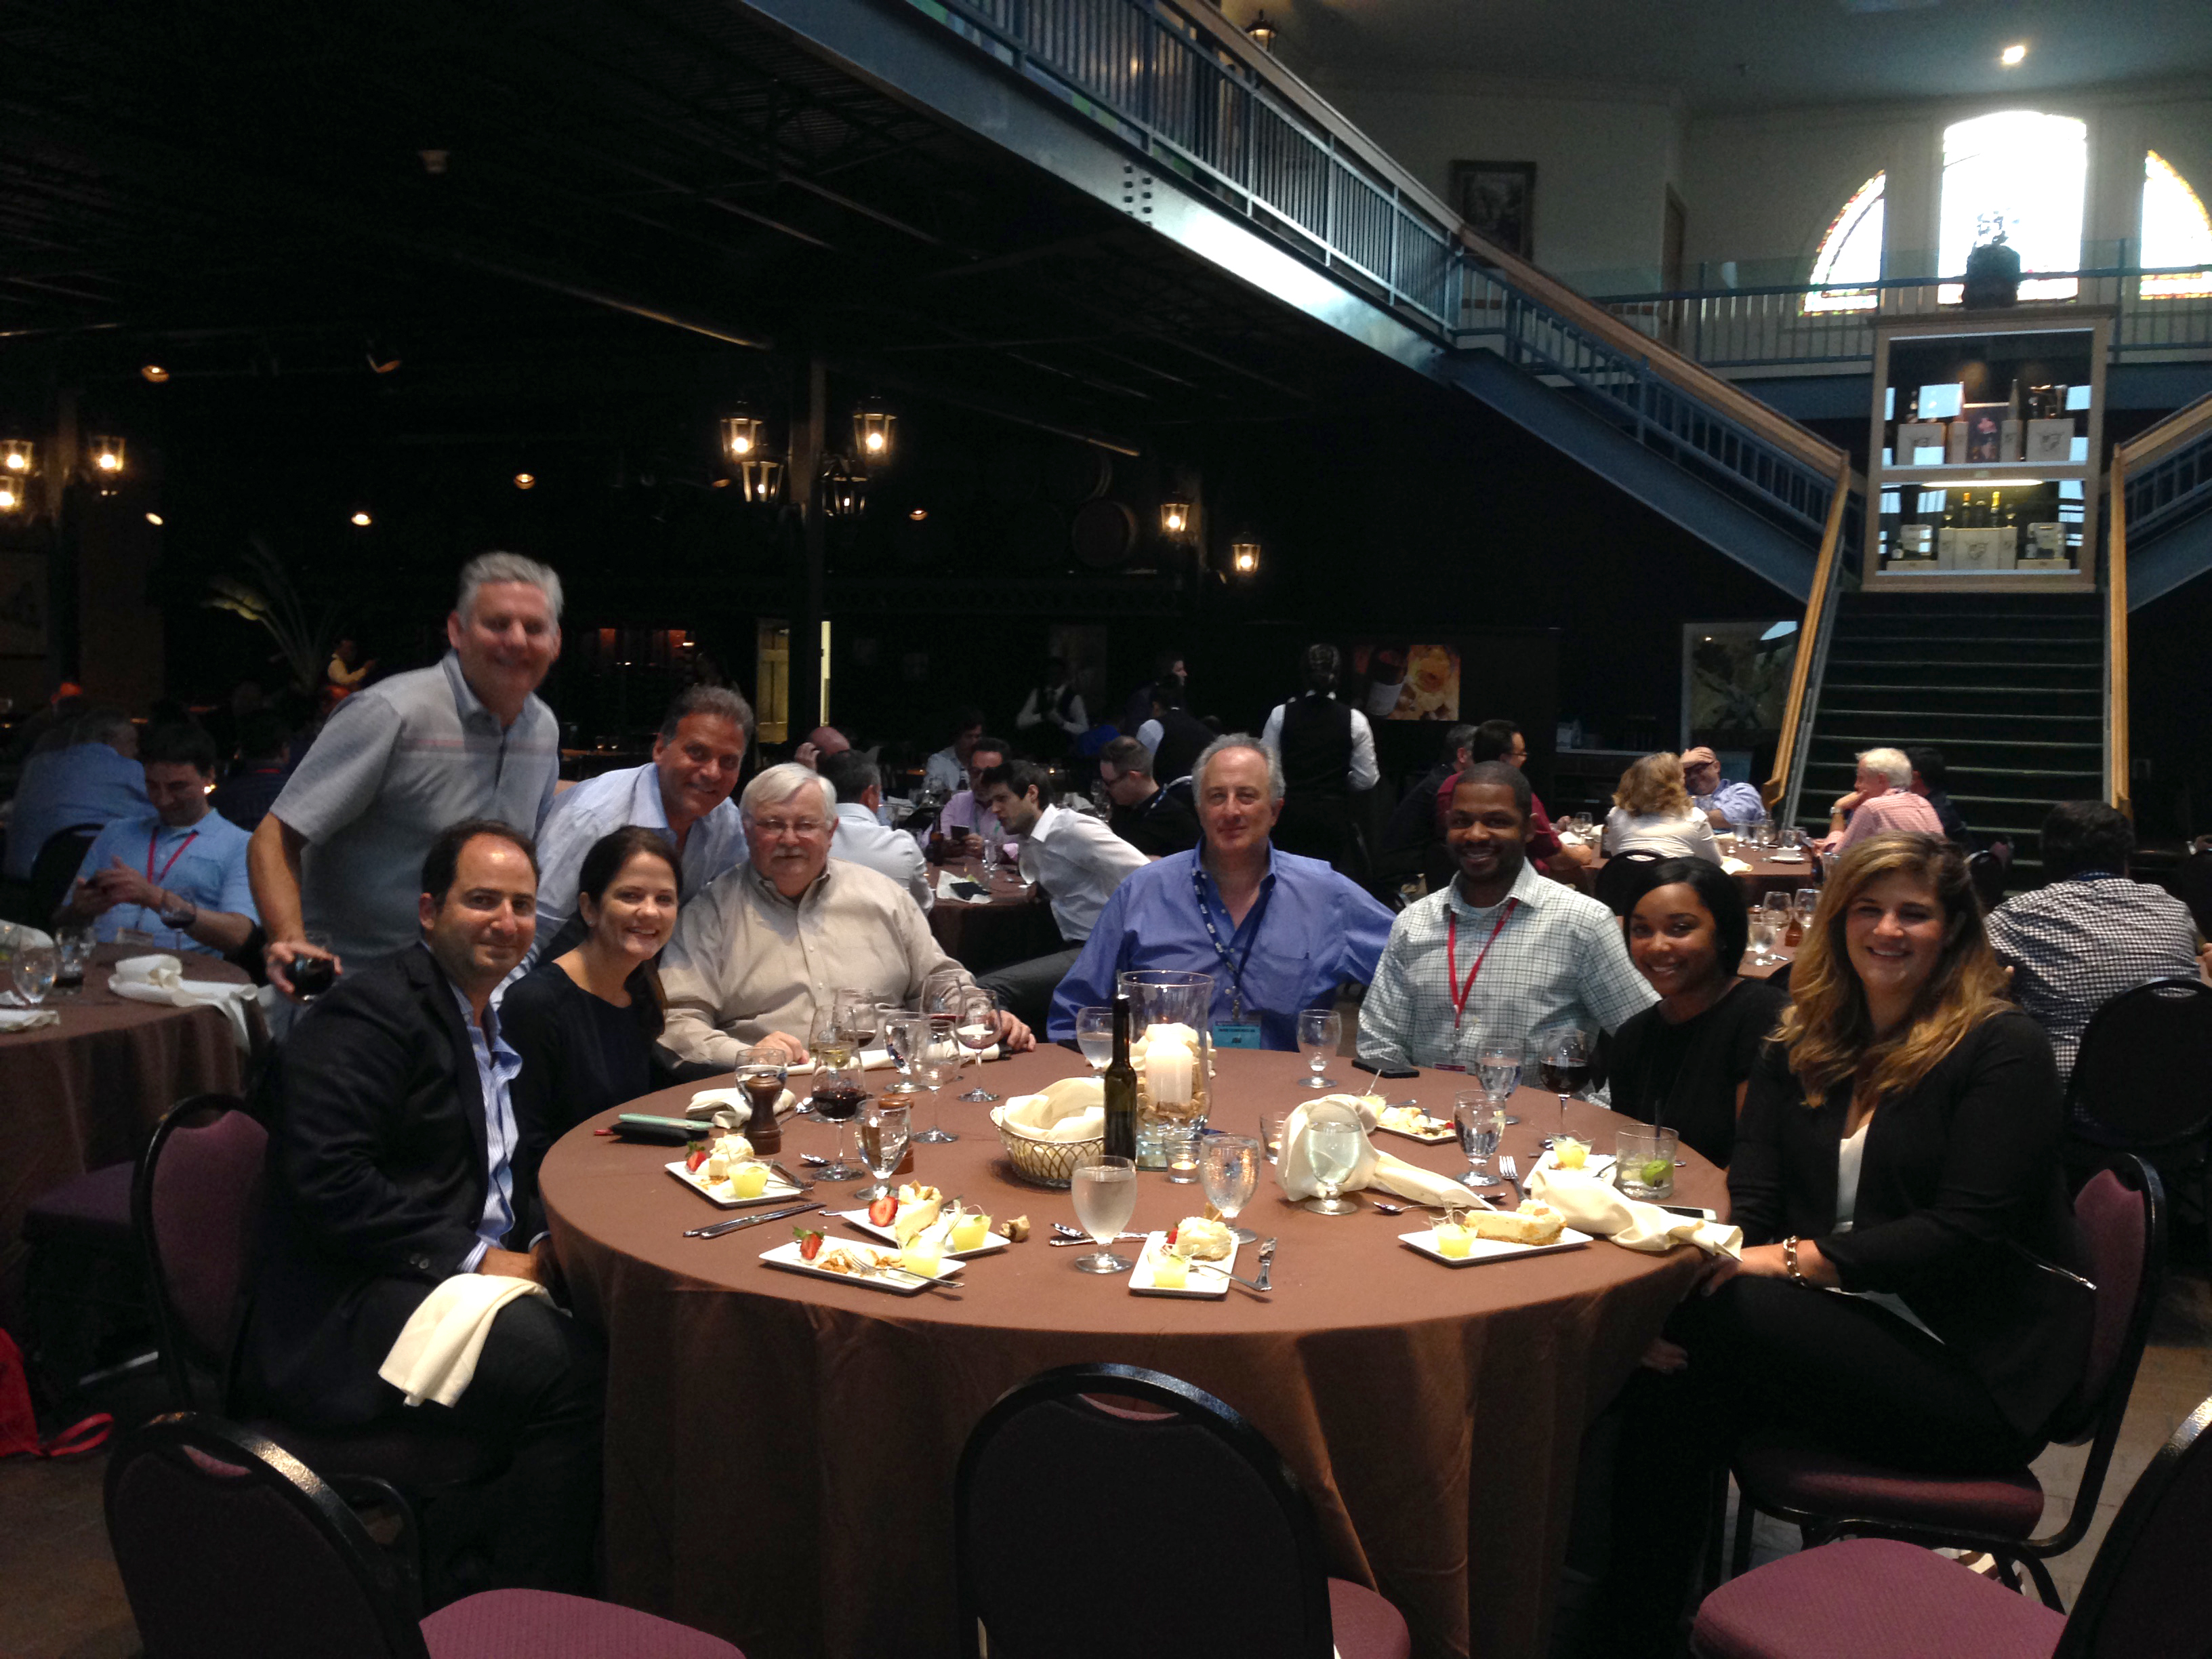 ECRM dinners and evening activities provide a great opportunity for attendees to discuss the latest industry happenings.